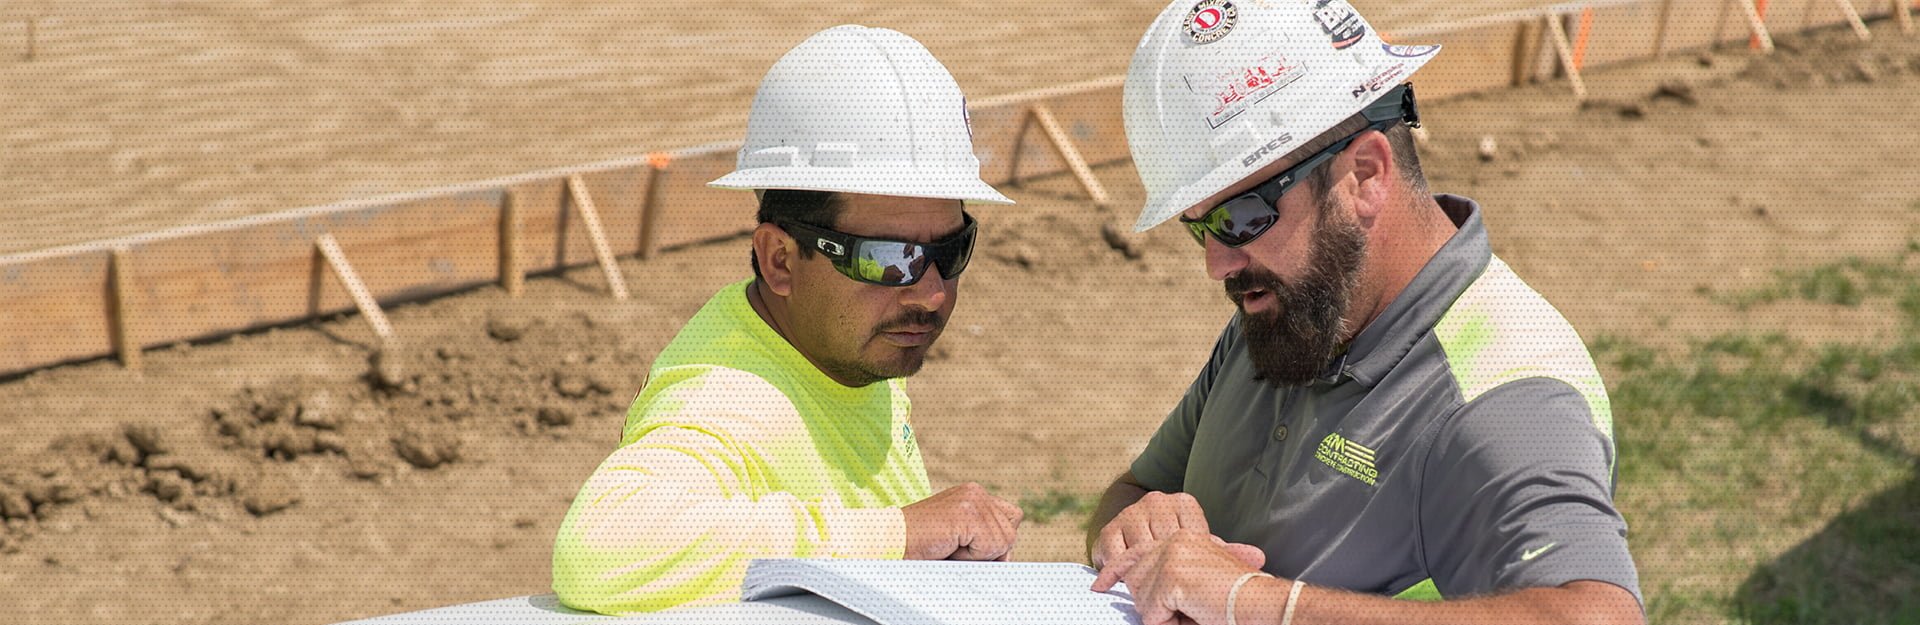 The AM Contracting guys reading the specs for their new job site analyzing and focusing on the details along with a wooden structure in the background to keep the new concrete in place.